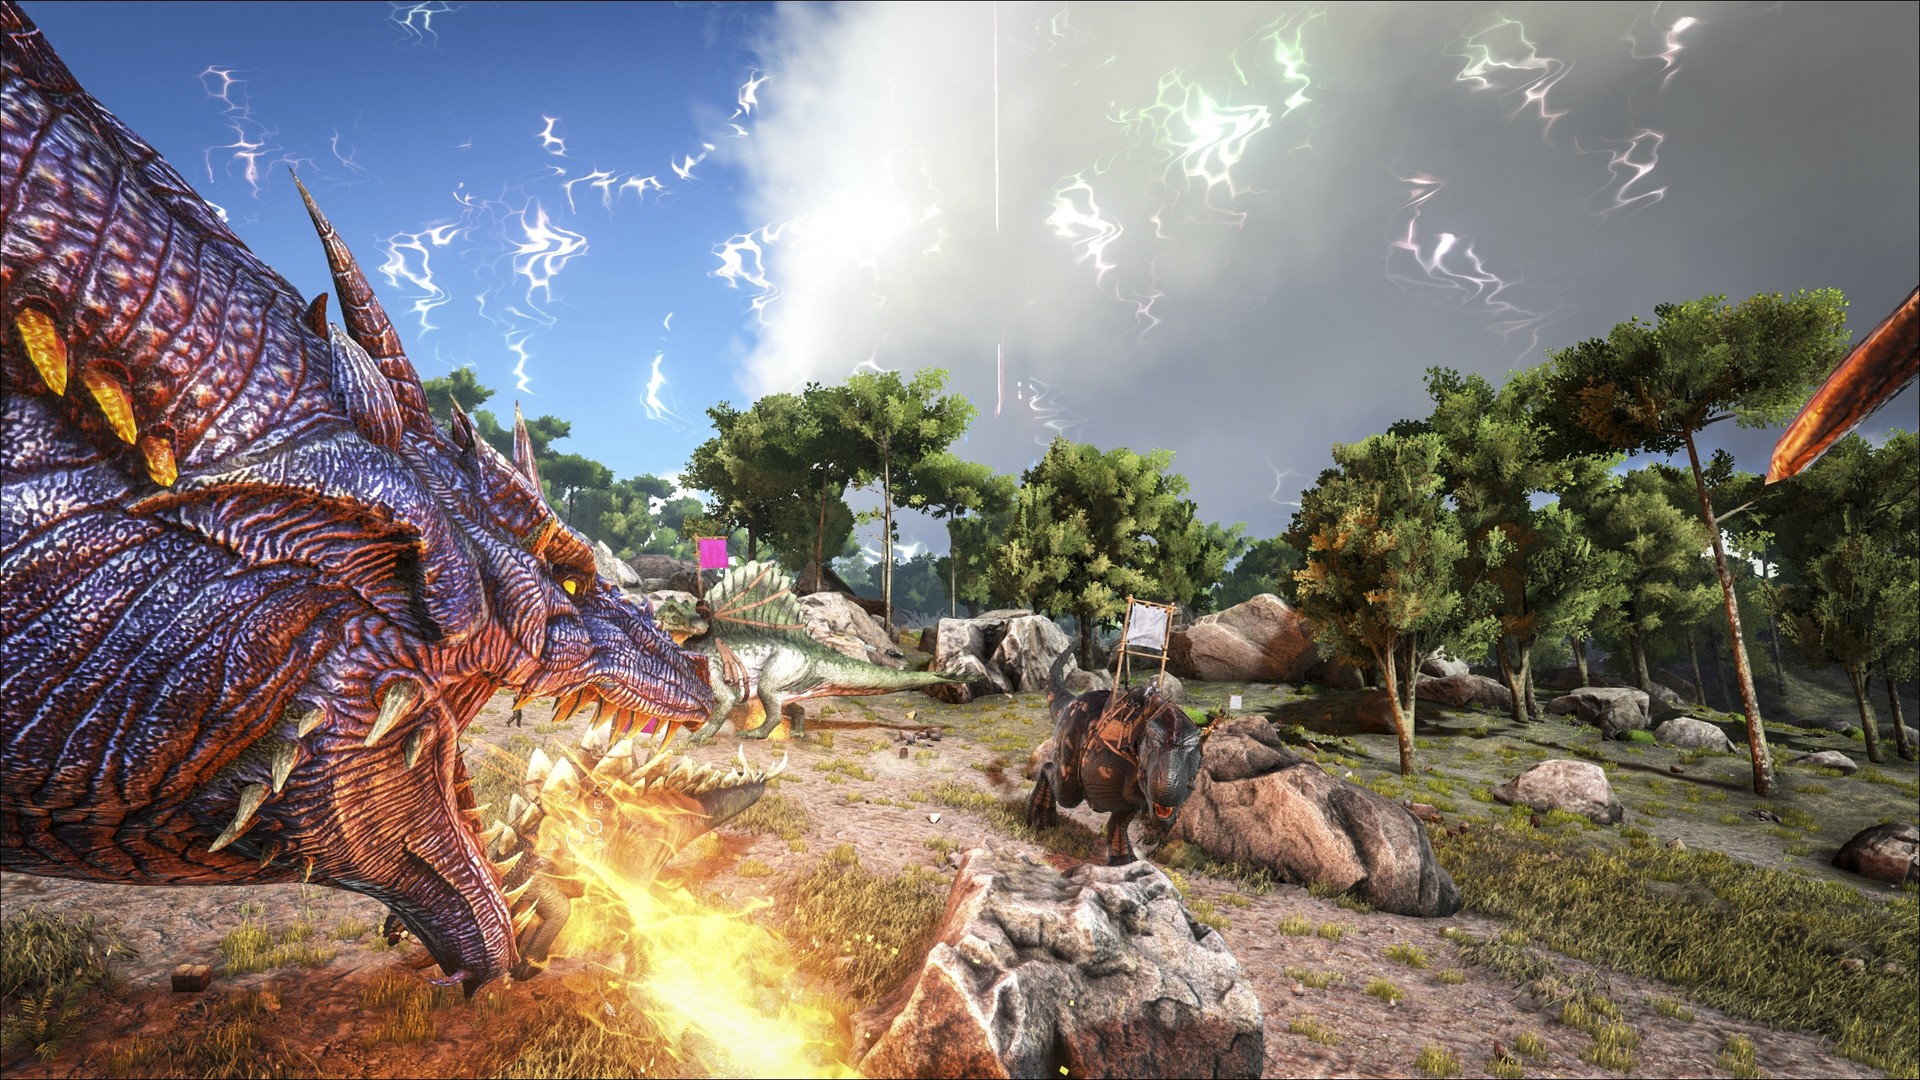 Ark Survival Of The Fittest On Steam